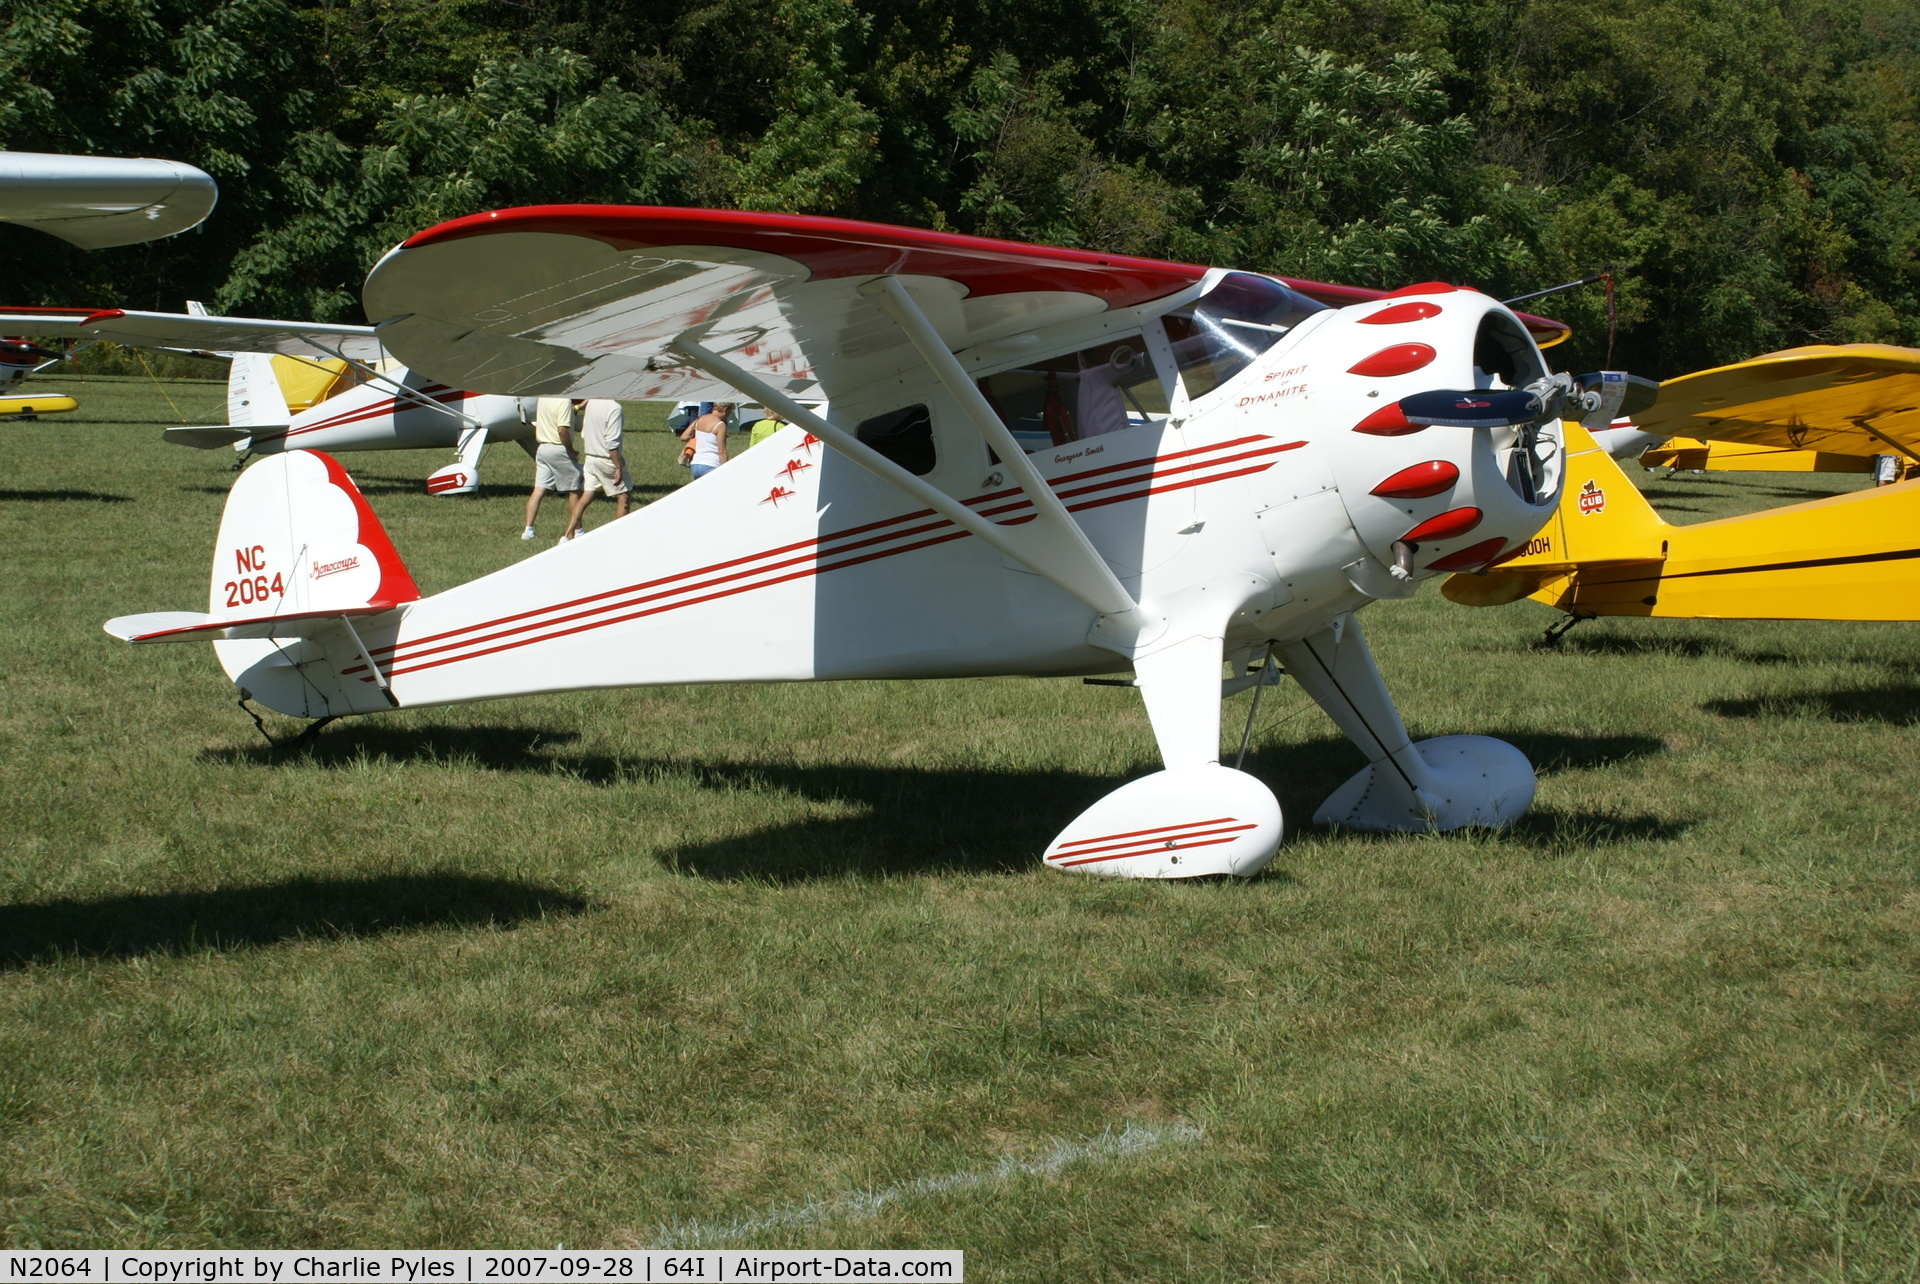 N2064, 1937 Monocoupe 110 Special C/N A748, Lee Bottom